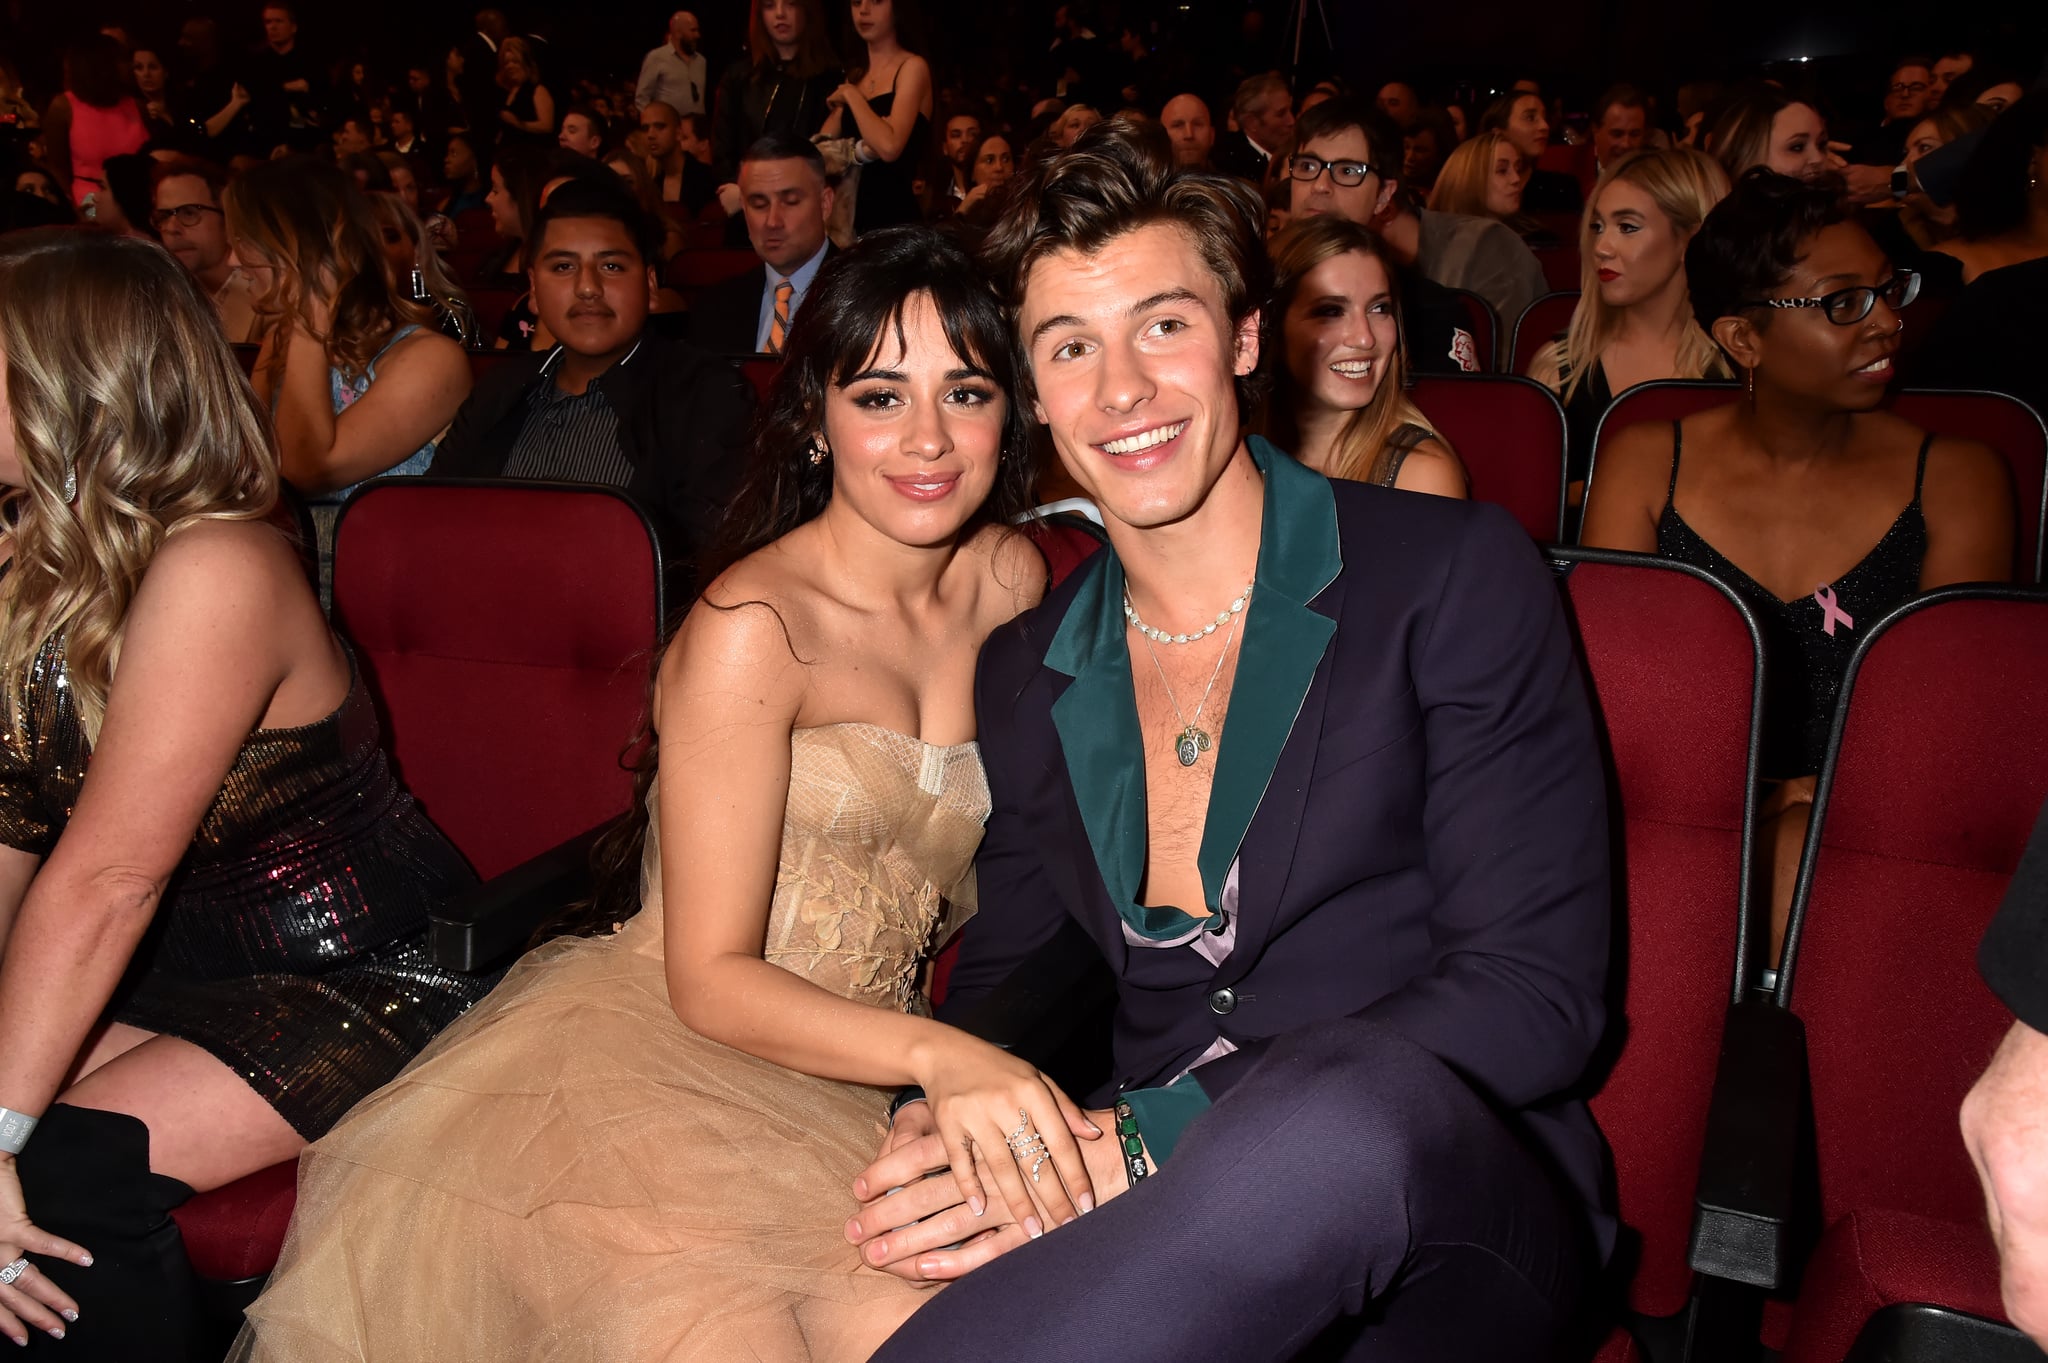 LOS ANGELES, CALIFORNIA - NOVEMBER 24: (L-R) Camila Cabello and Shawn Mendes attend the 2019 American Music Awards at Microsoft Theatre on November 24, 2019 in Los Angeles, California. (Photo by Jeff Kravitz/AMA2019/FilmMagic for dcp)